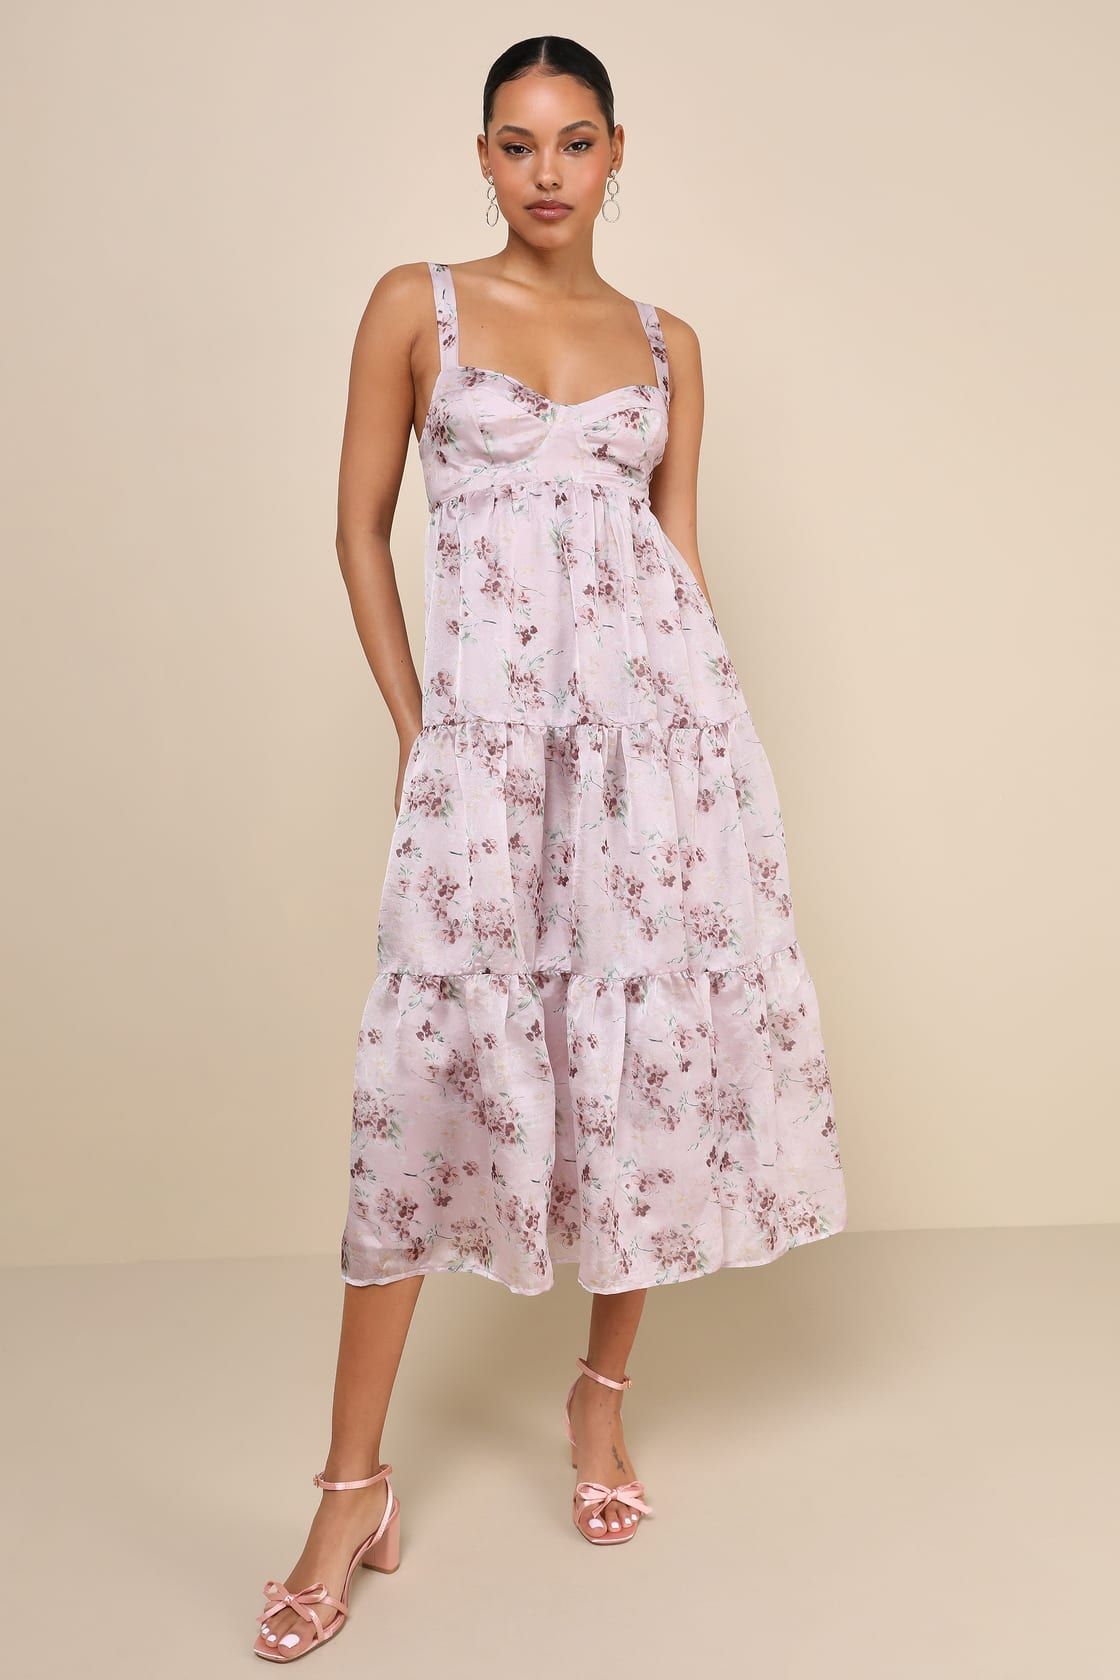 Marvelously Darling Mauve Floral Tiered Backless Midi Dress | Lulus